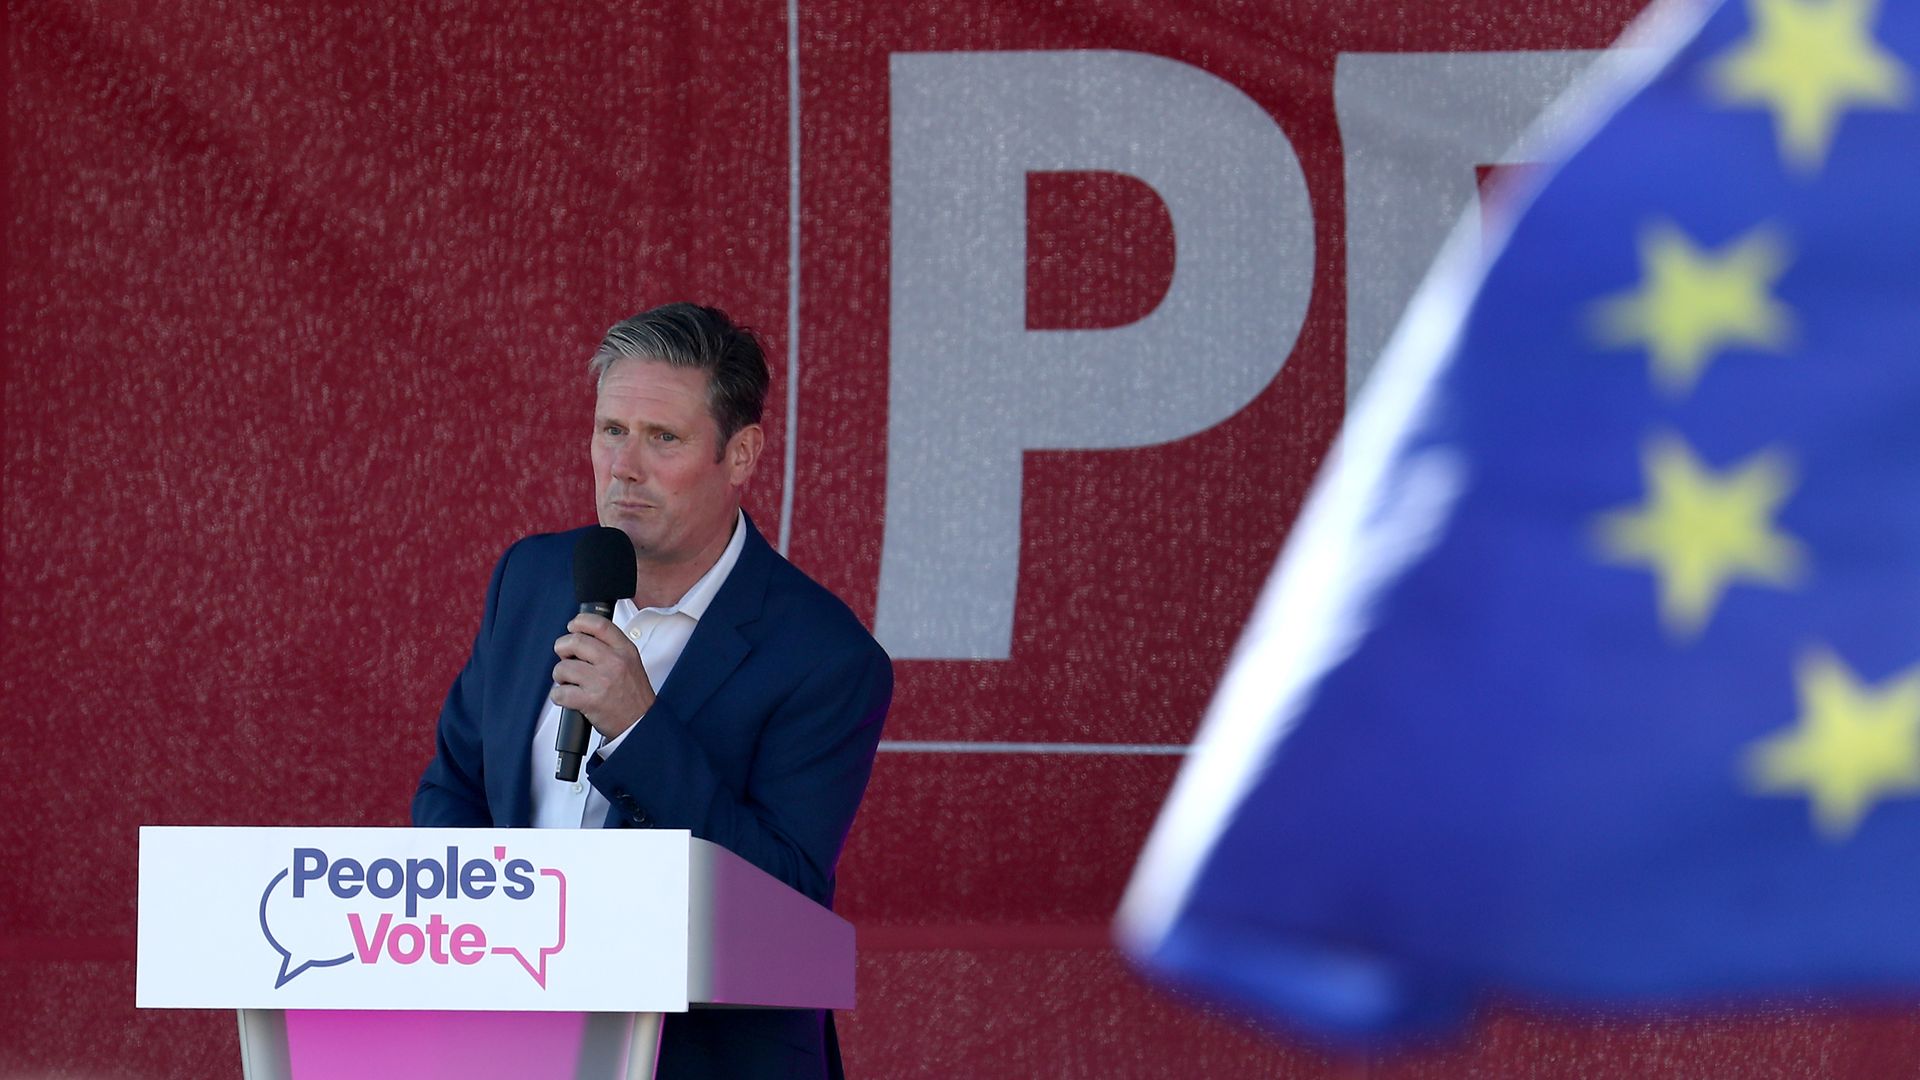 Sir Keir Starmer speaks at the Anti-Brexit 'Trust the People' march and People's Vote rally - Credit: PA